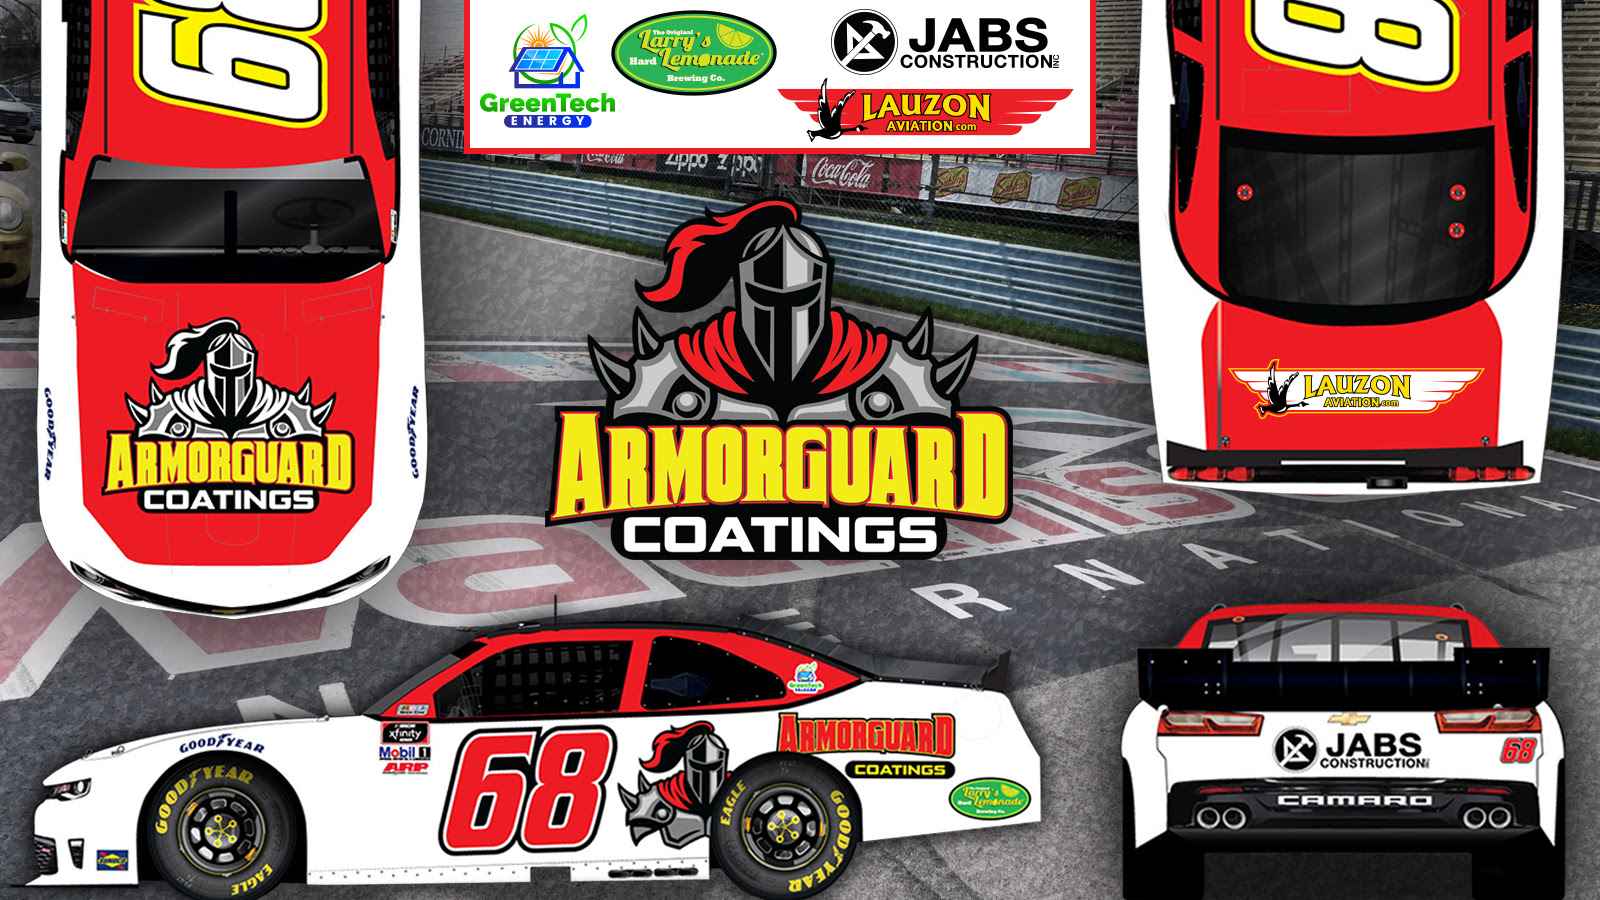 ArmorGuard Coatings Joins BMS for First NASCAR Xfinity Series Race as Primary Partner for Watkins Glen